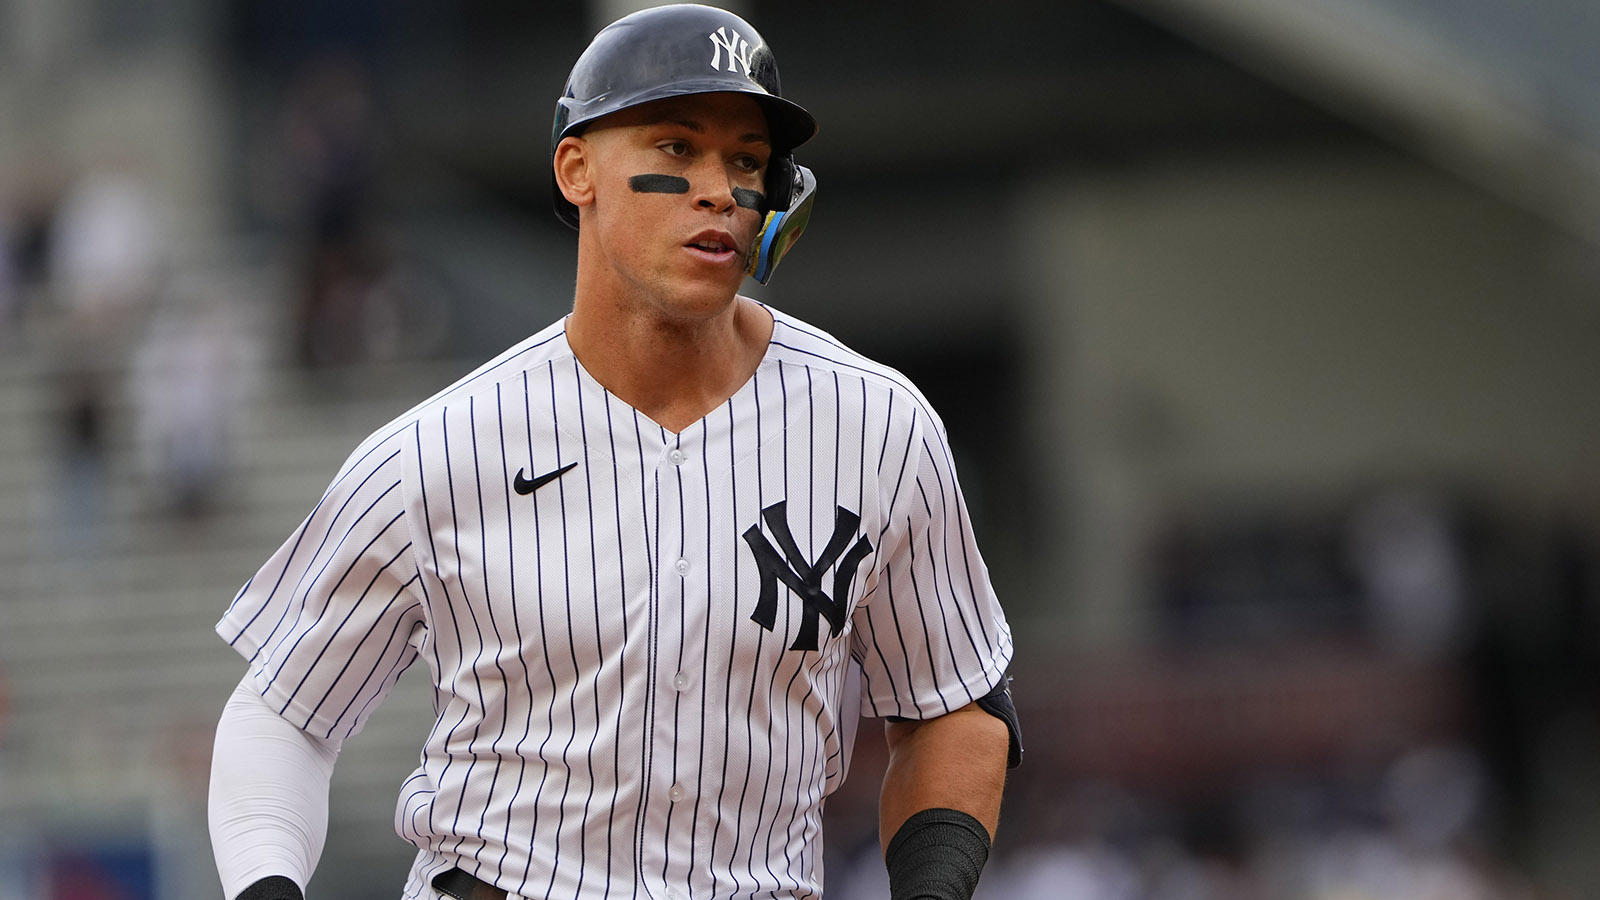 Aaron Judge becomes Yanks captain, with Derek Jeter at side